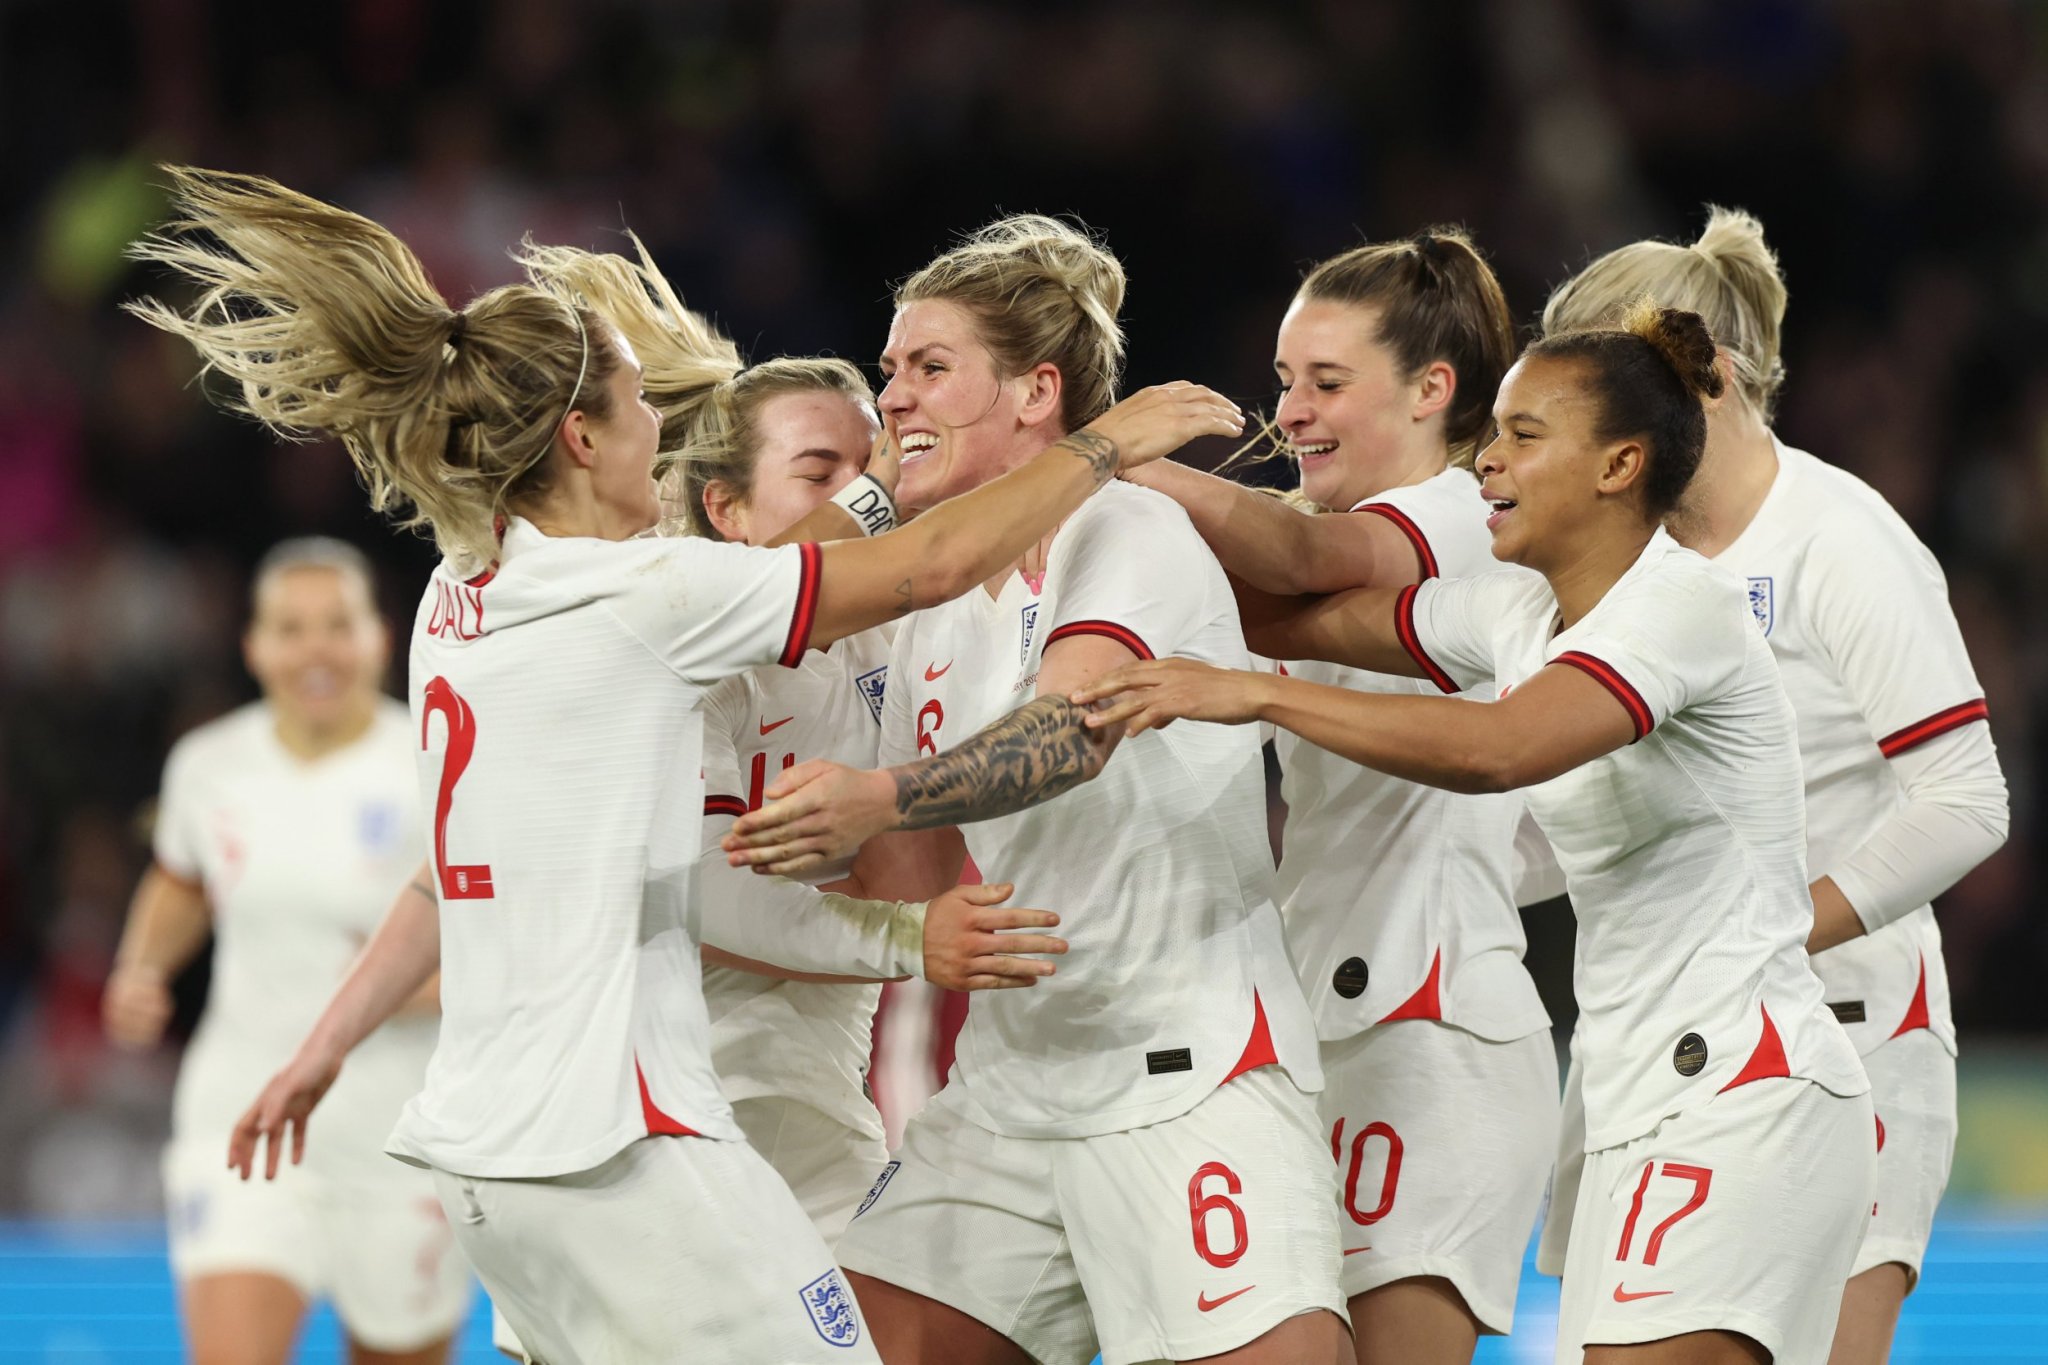 This year’s Euros and international tournaments will turbocharge the focus on the women’s game